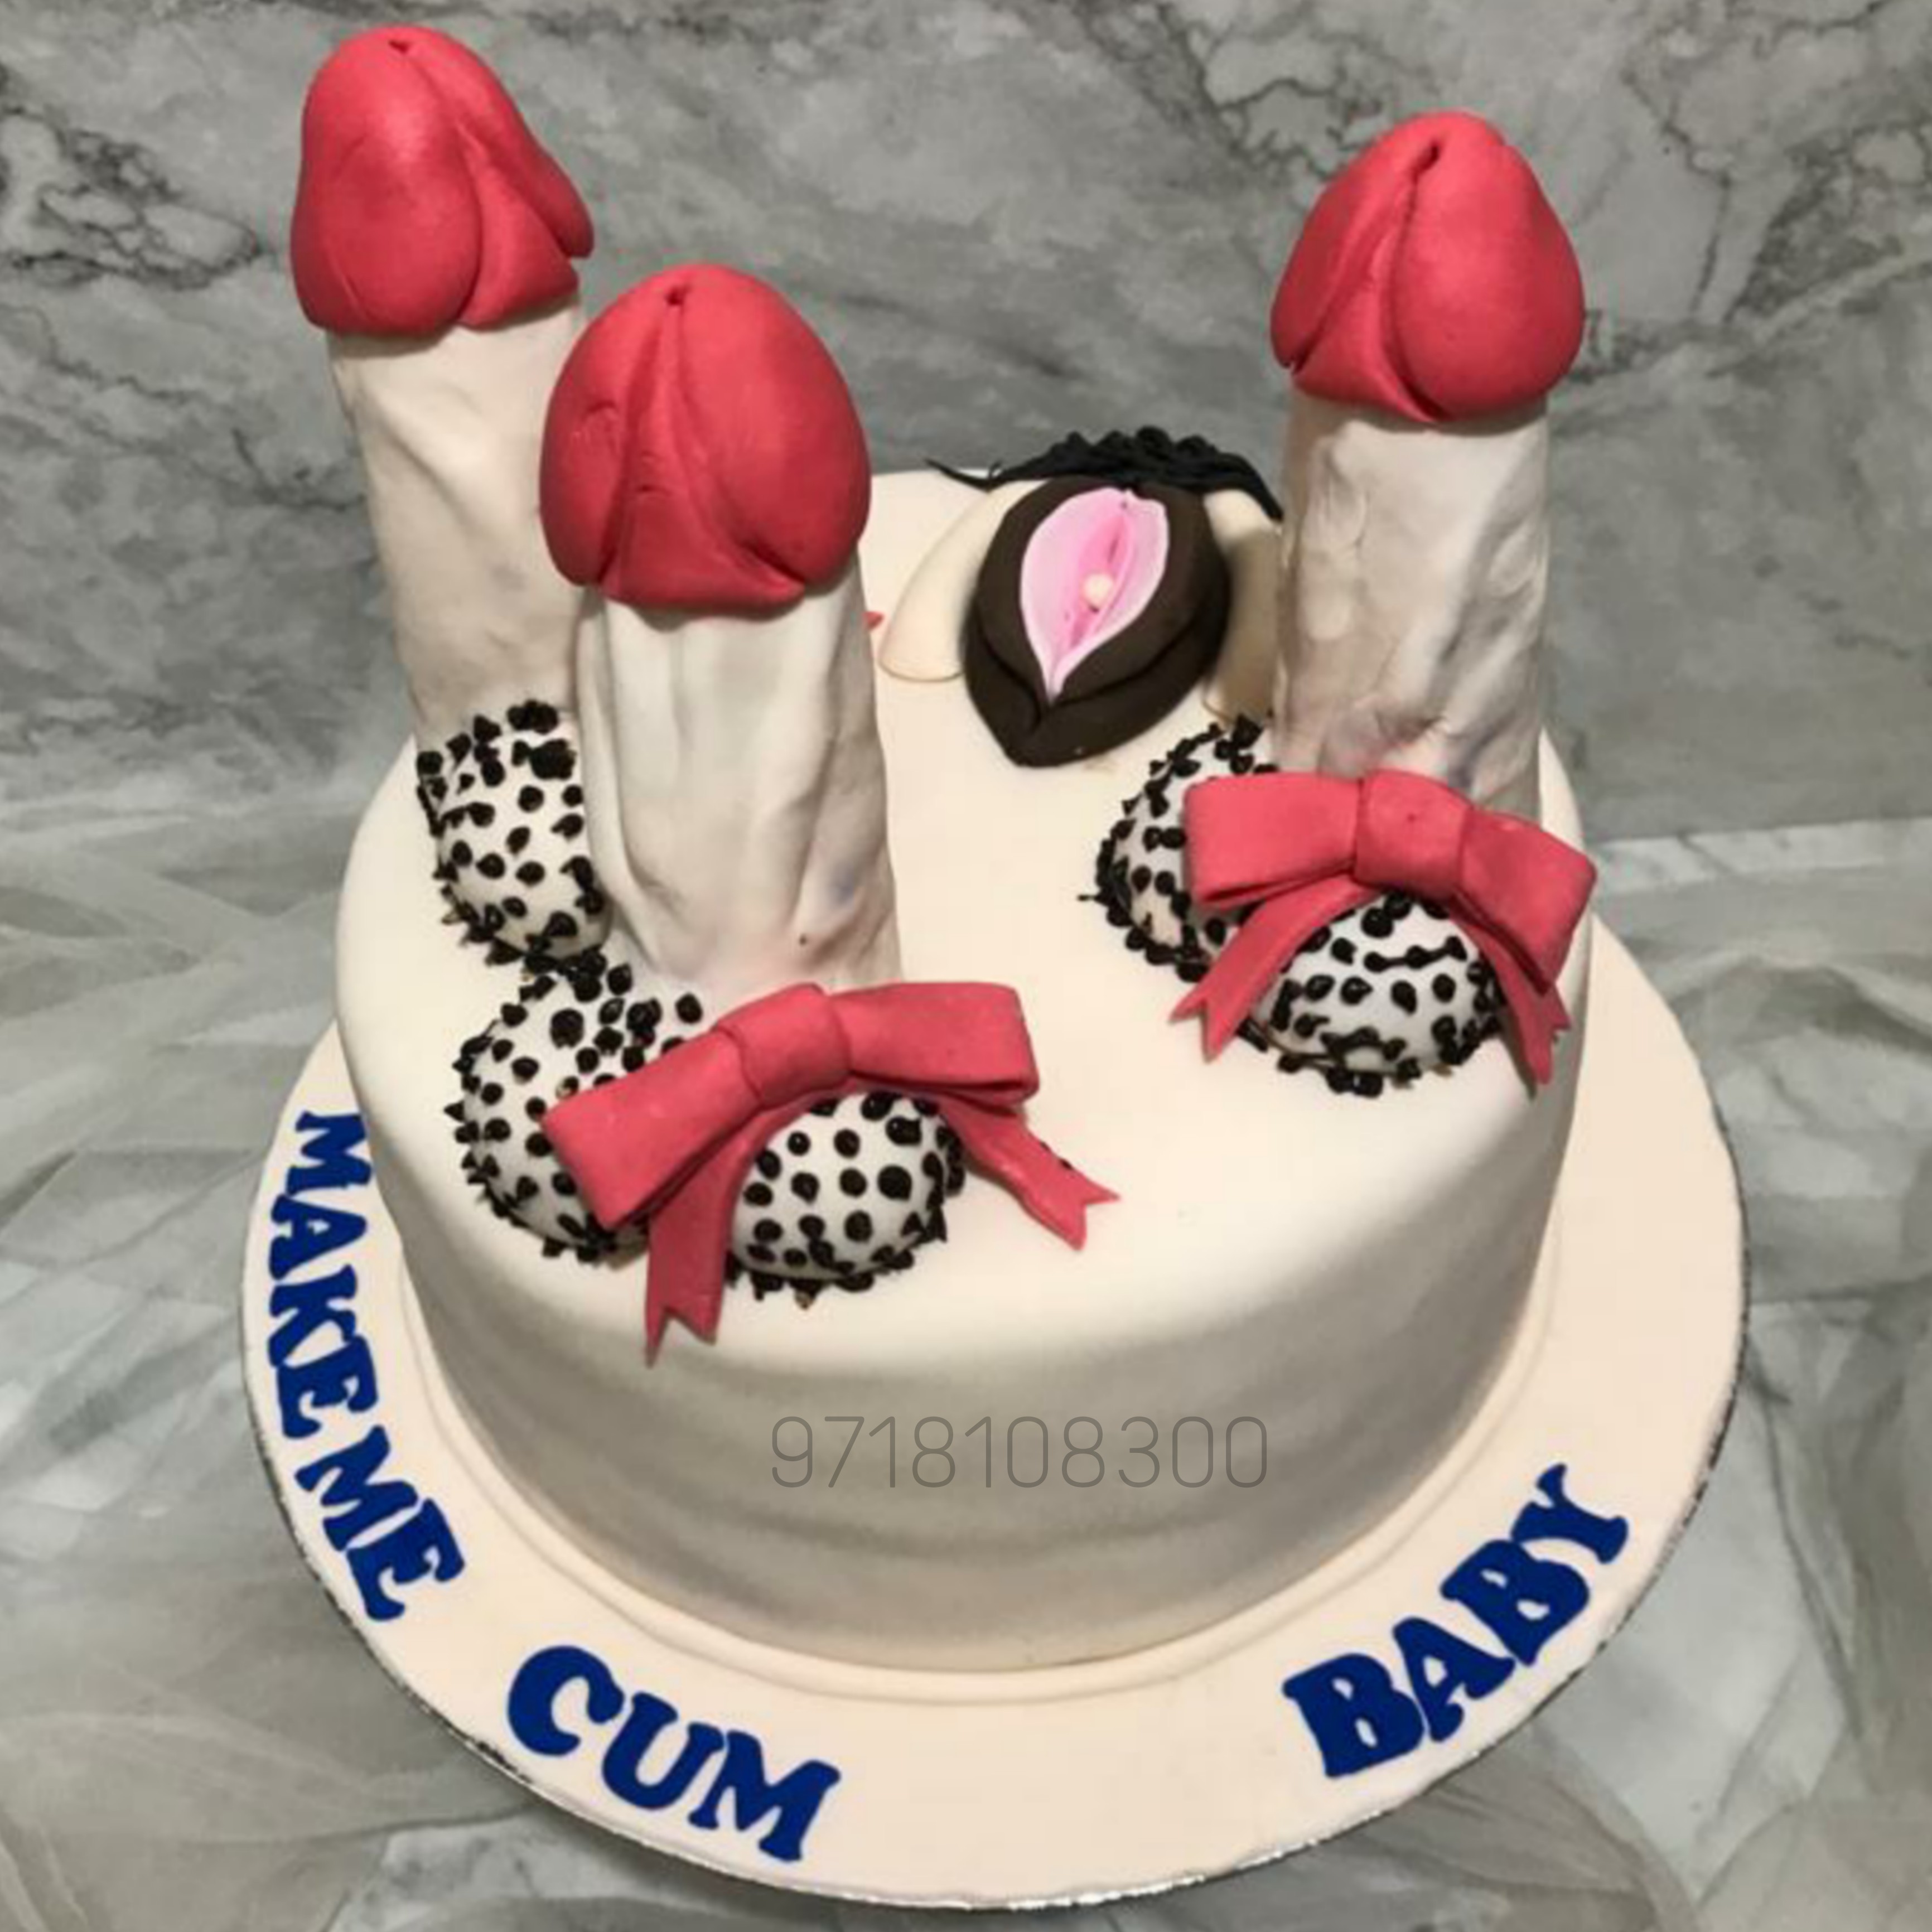 https://www.yummycake.co.in/wp-content/uploads/2022/03/Bachelor-Party-Cake-for-Bride.jpg